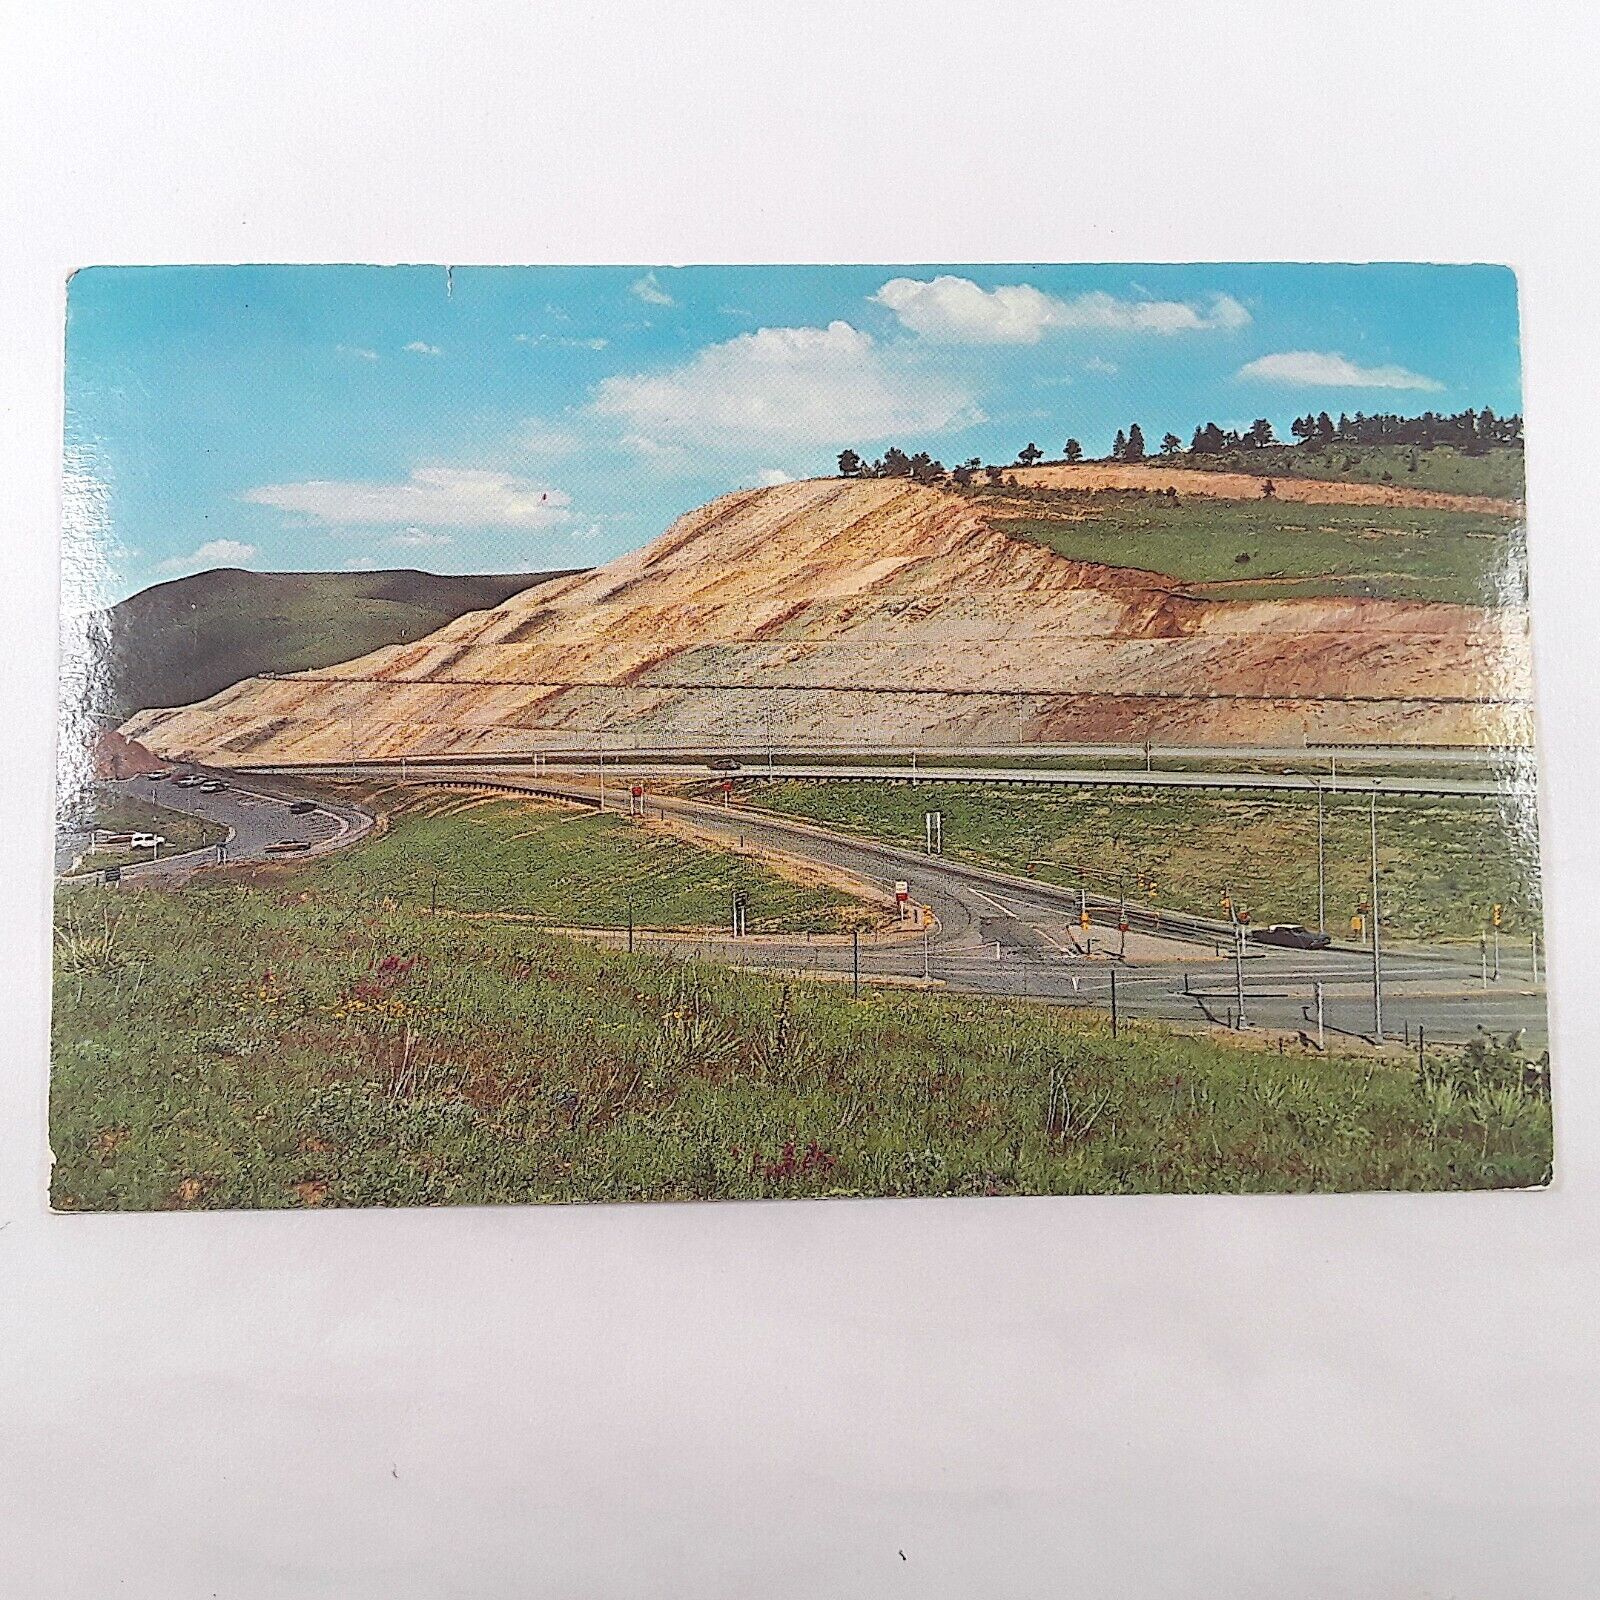 Colorado HOGBACK -Interstate 70- Geological Site Jurassic Postcard Posted 1972